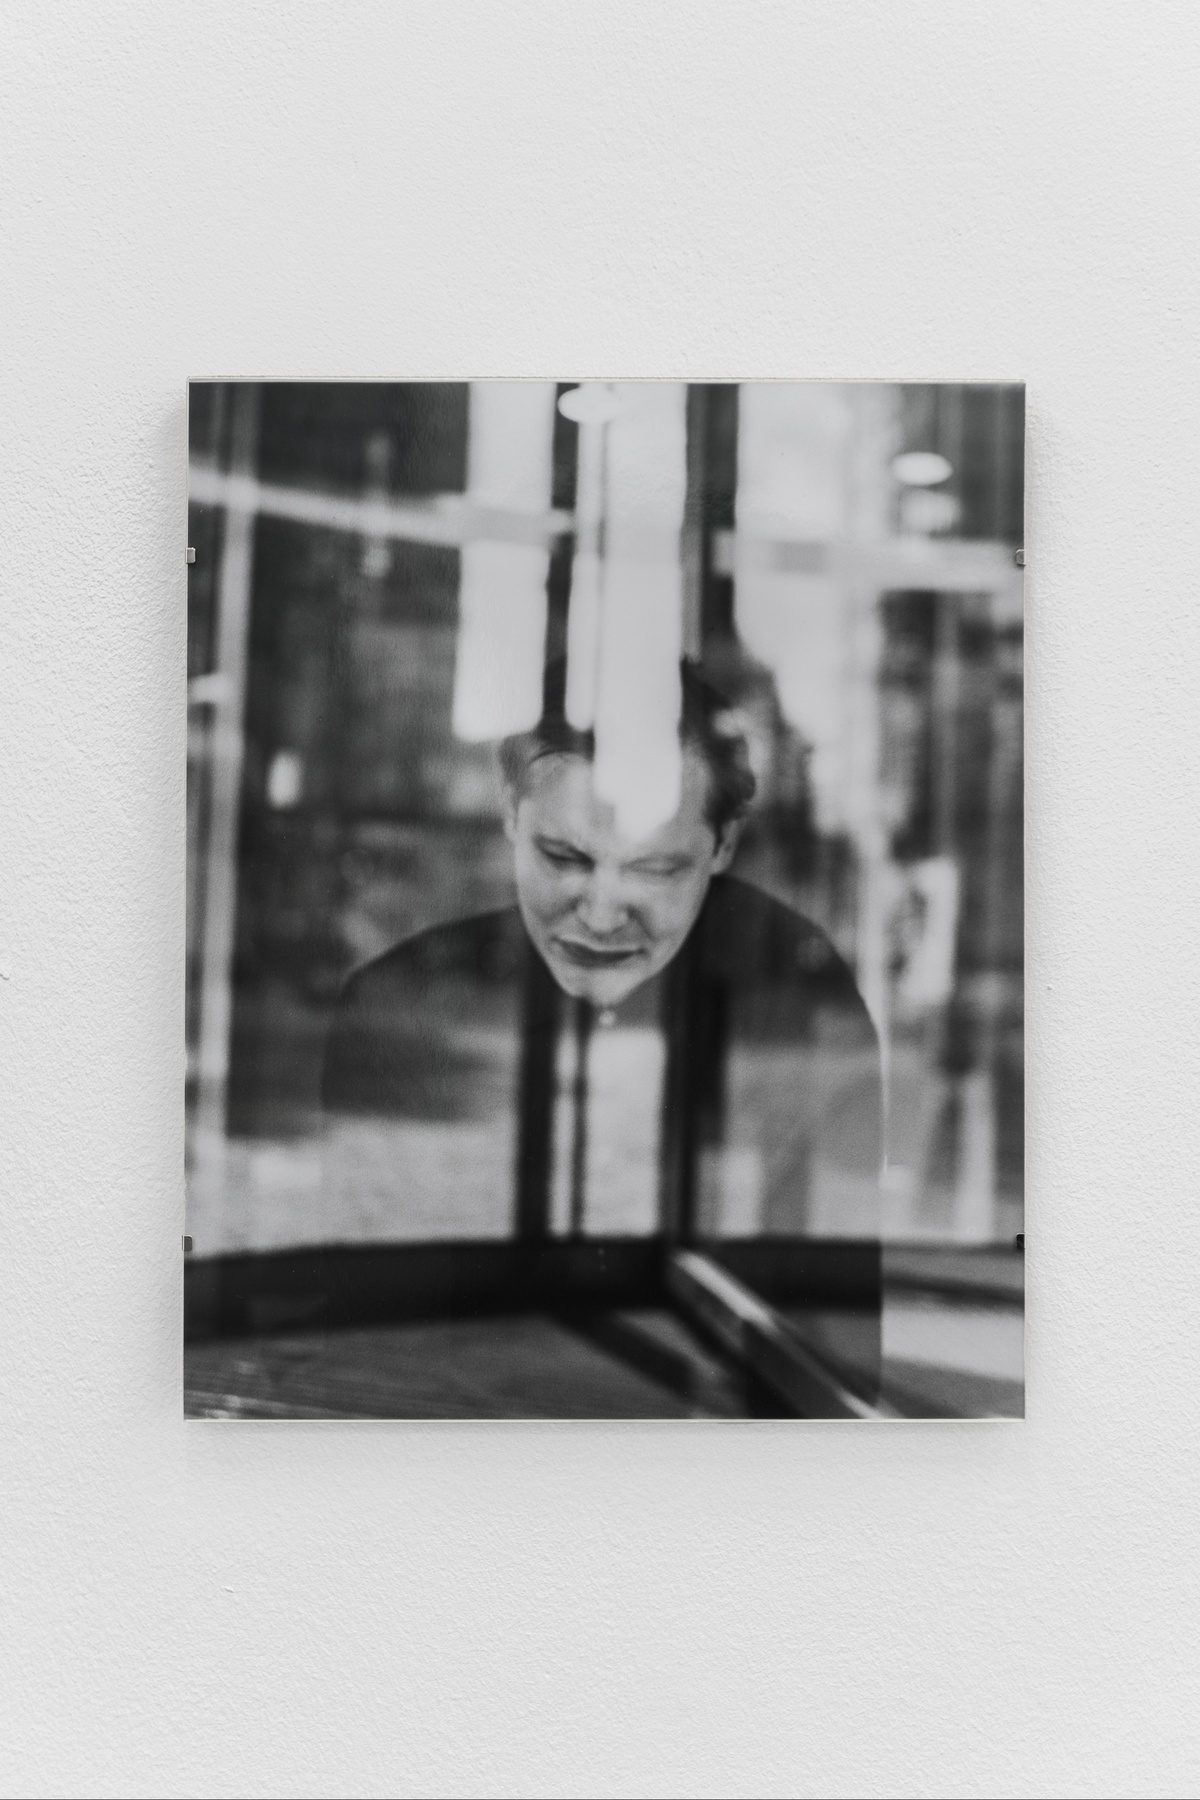 Sarah RosengartenNo no, they have been amplified., 2021 analog c-print, clip frame, museum glas 35,3 × 28,4 cm